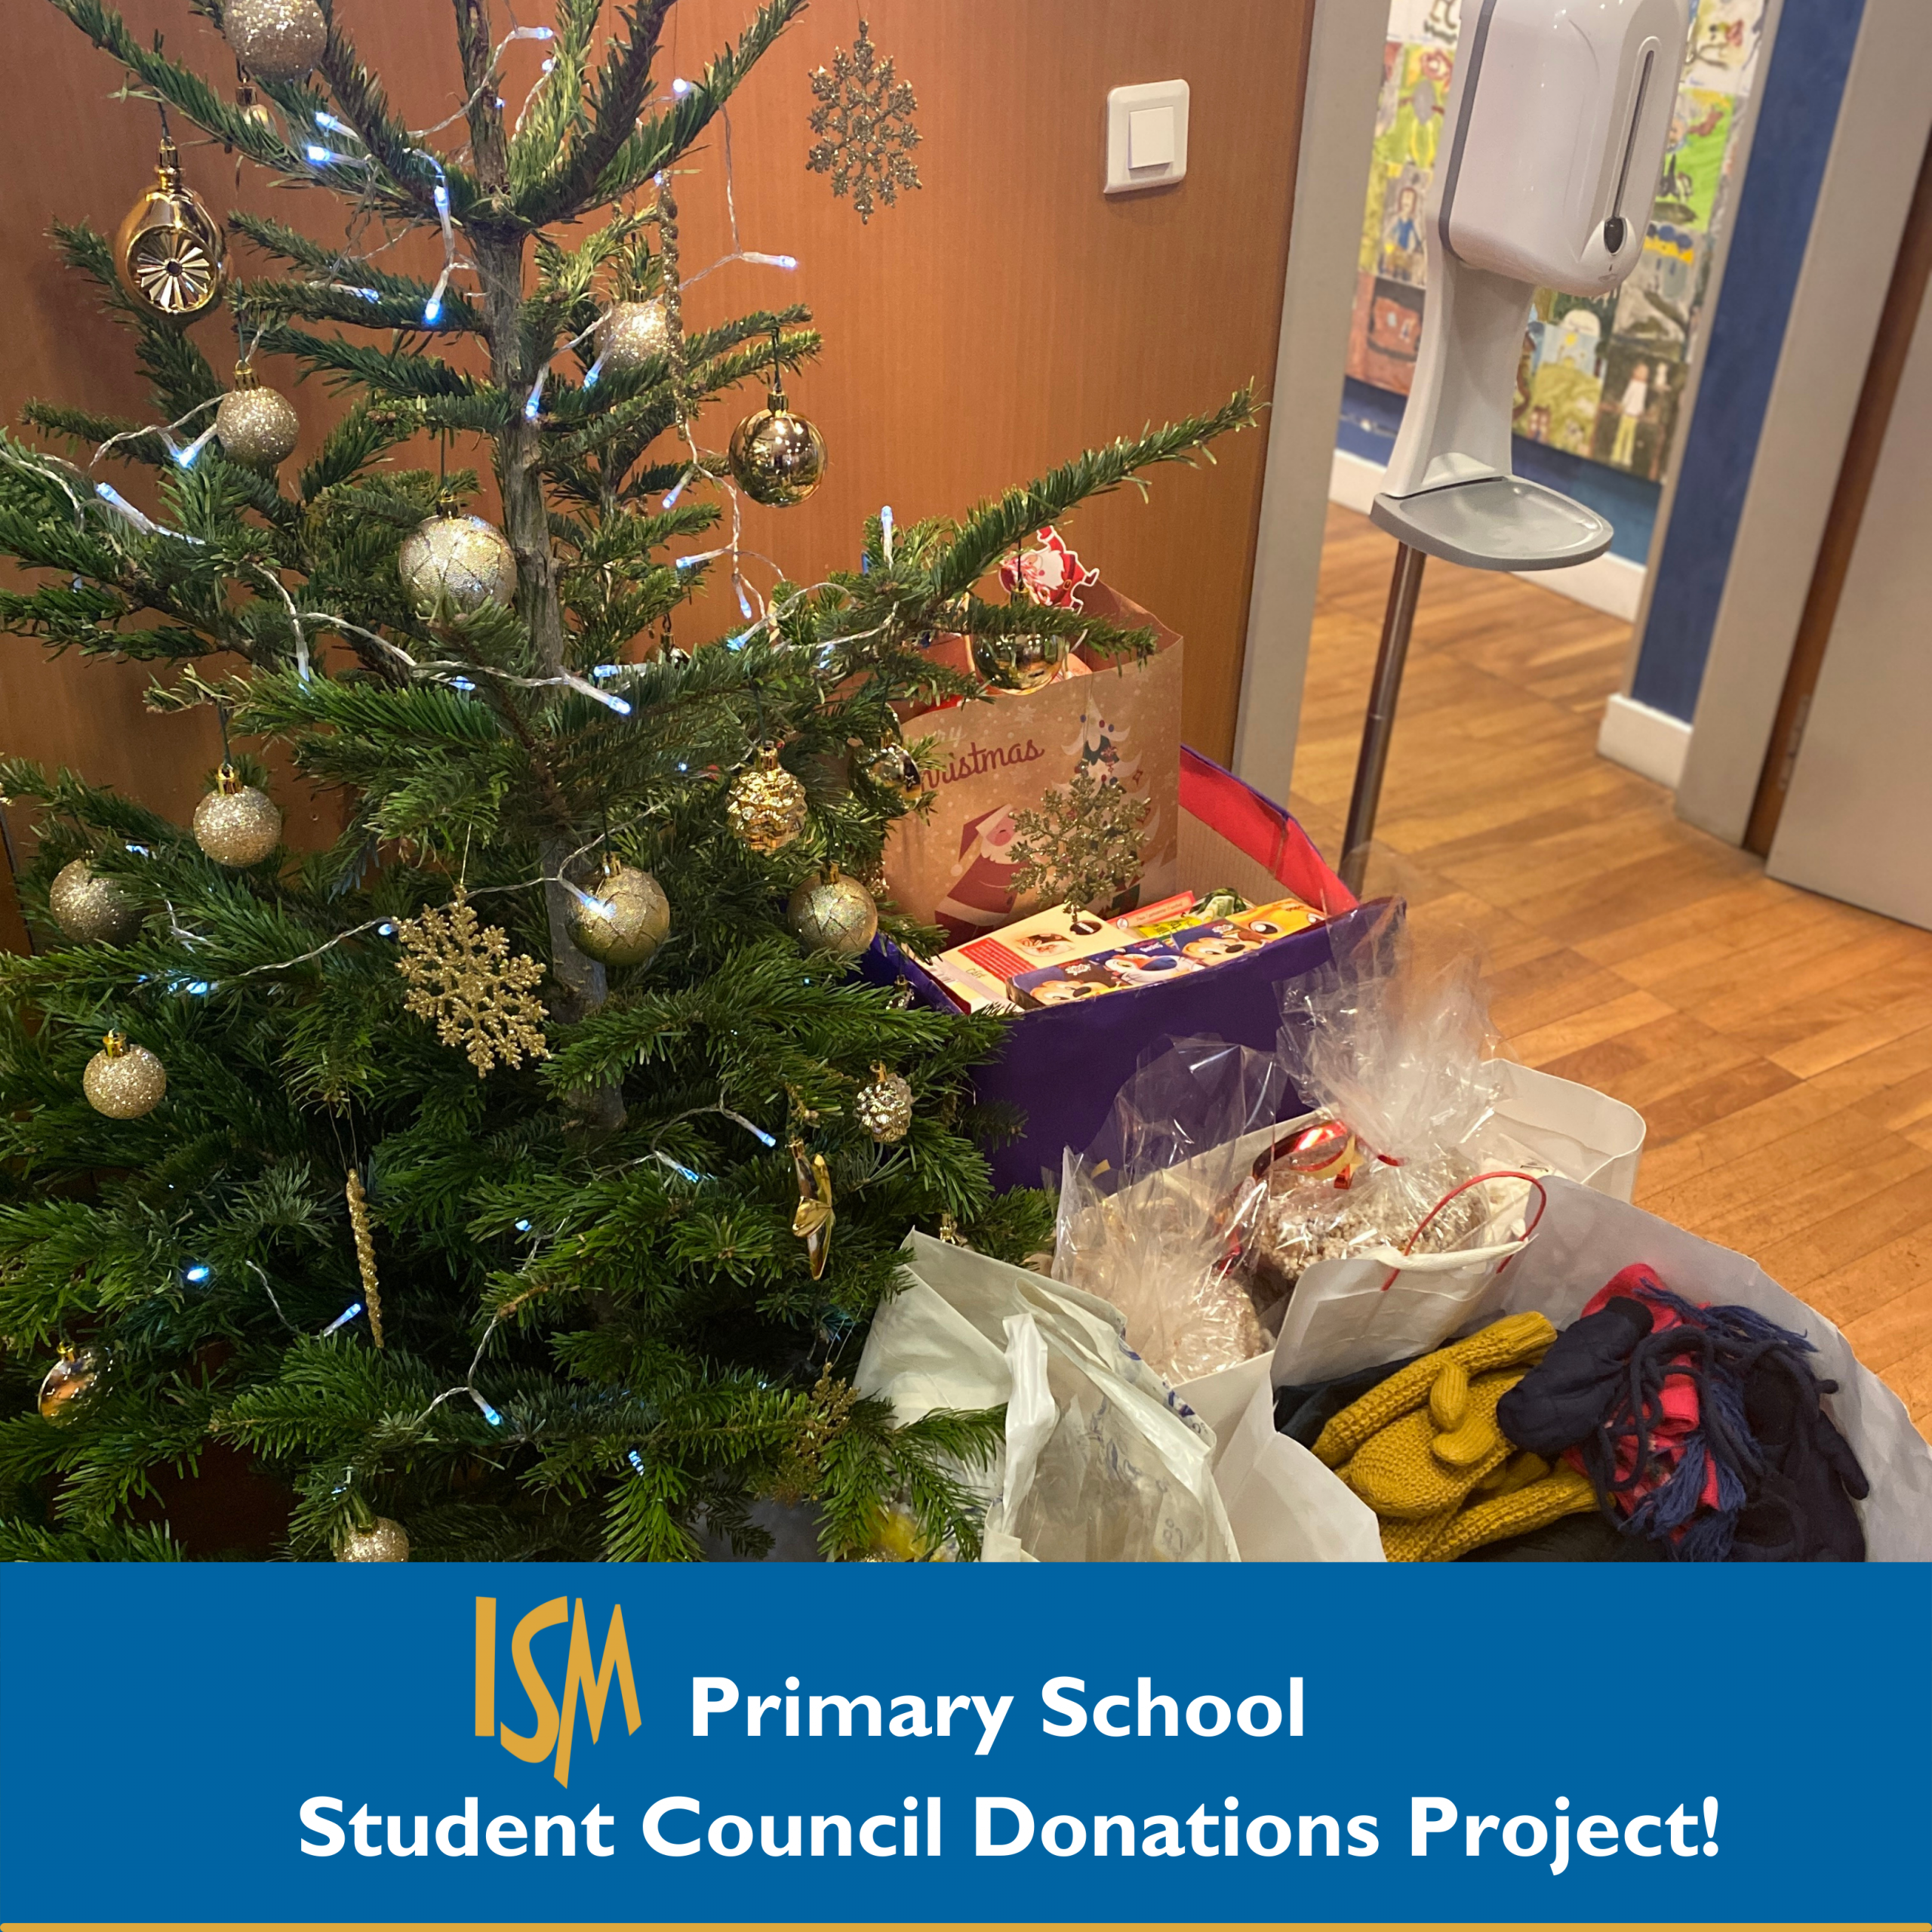 Primary School Student Council organises holiday philanthropy project Image